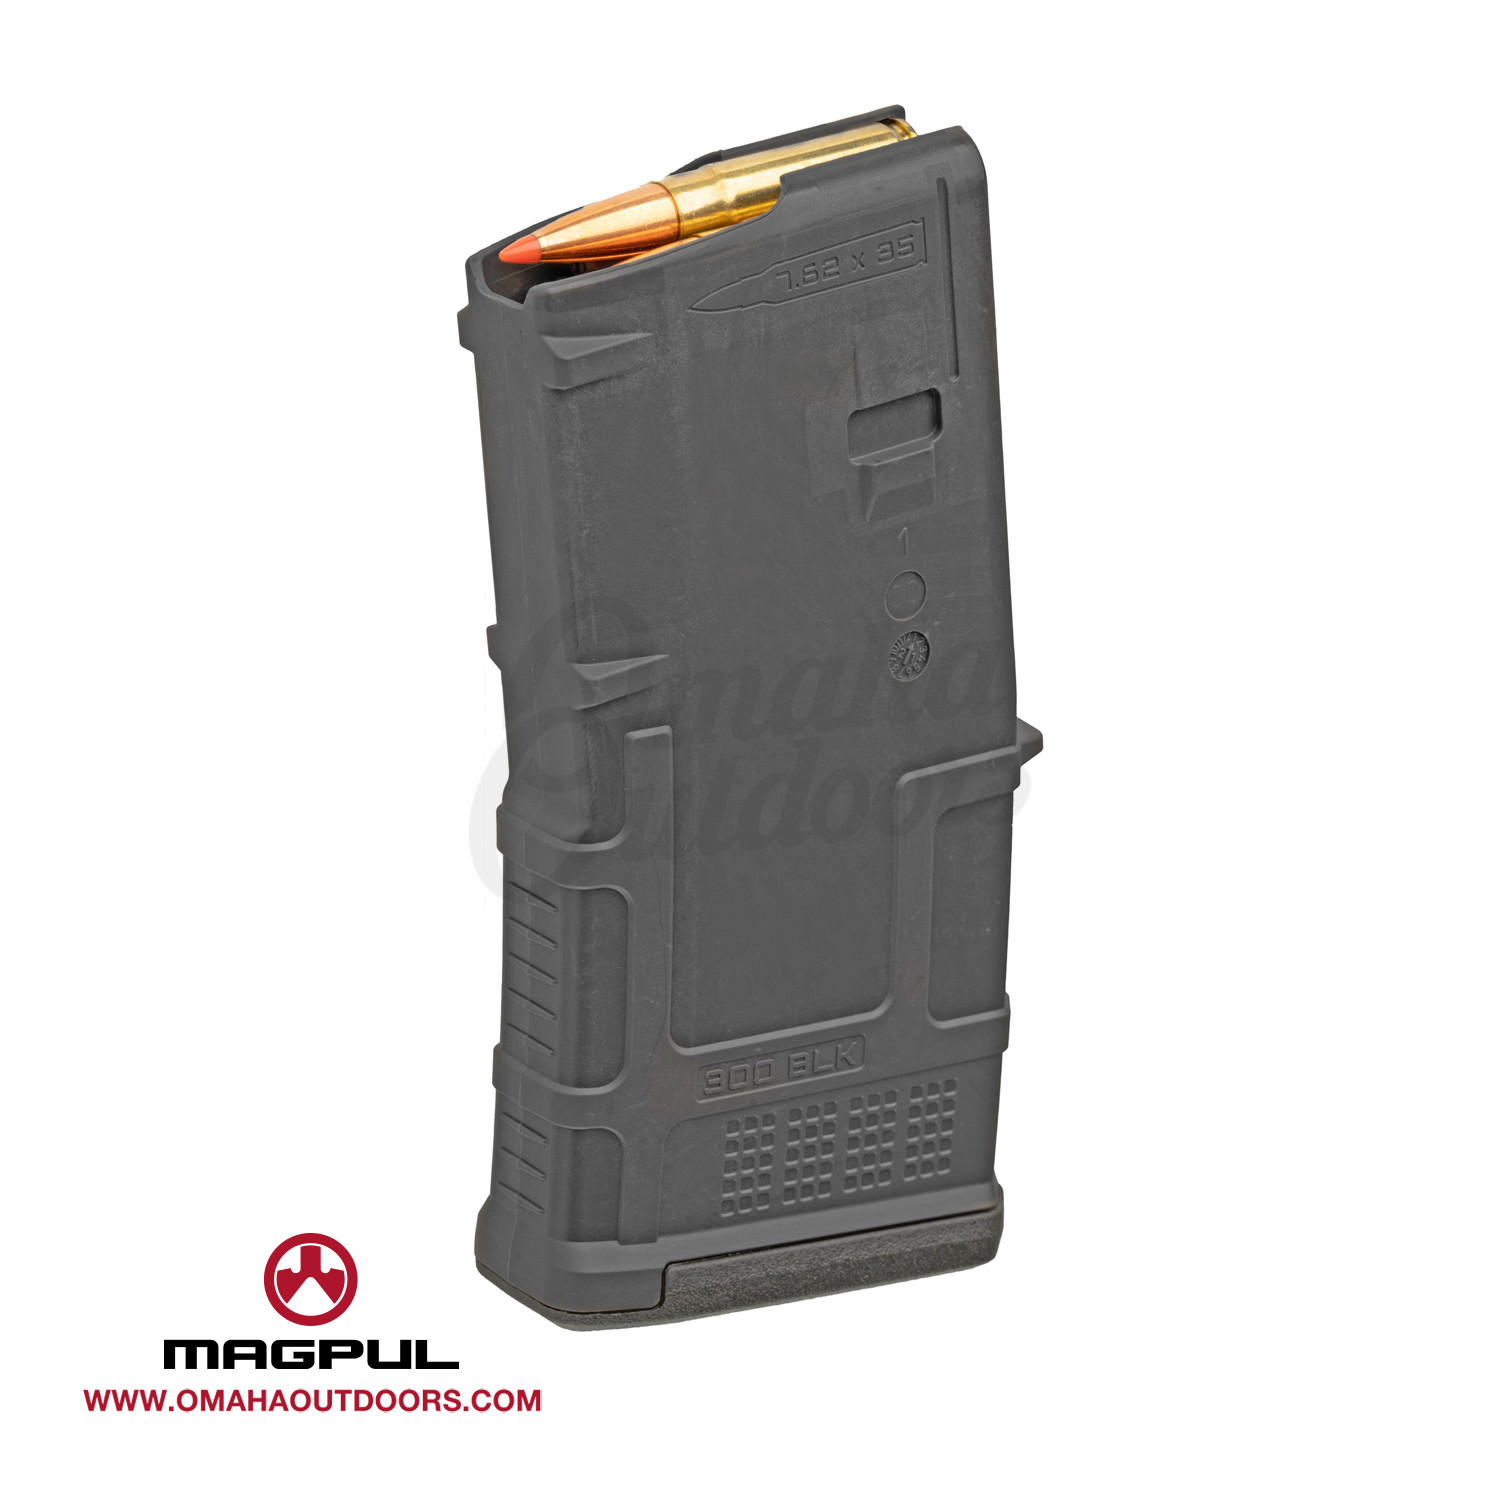 Magpul PMAG M3 300 Blackout 20 Round Magazine - In Stock